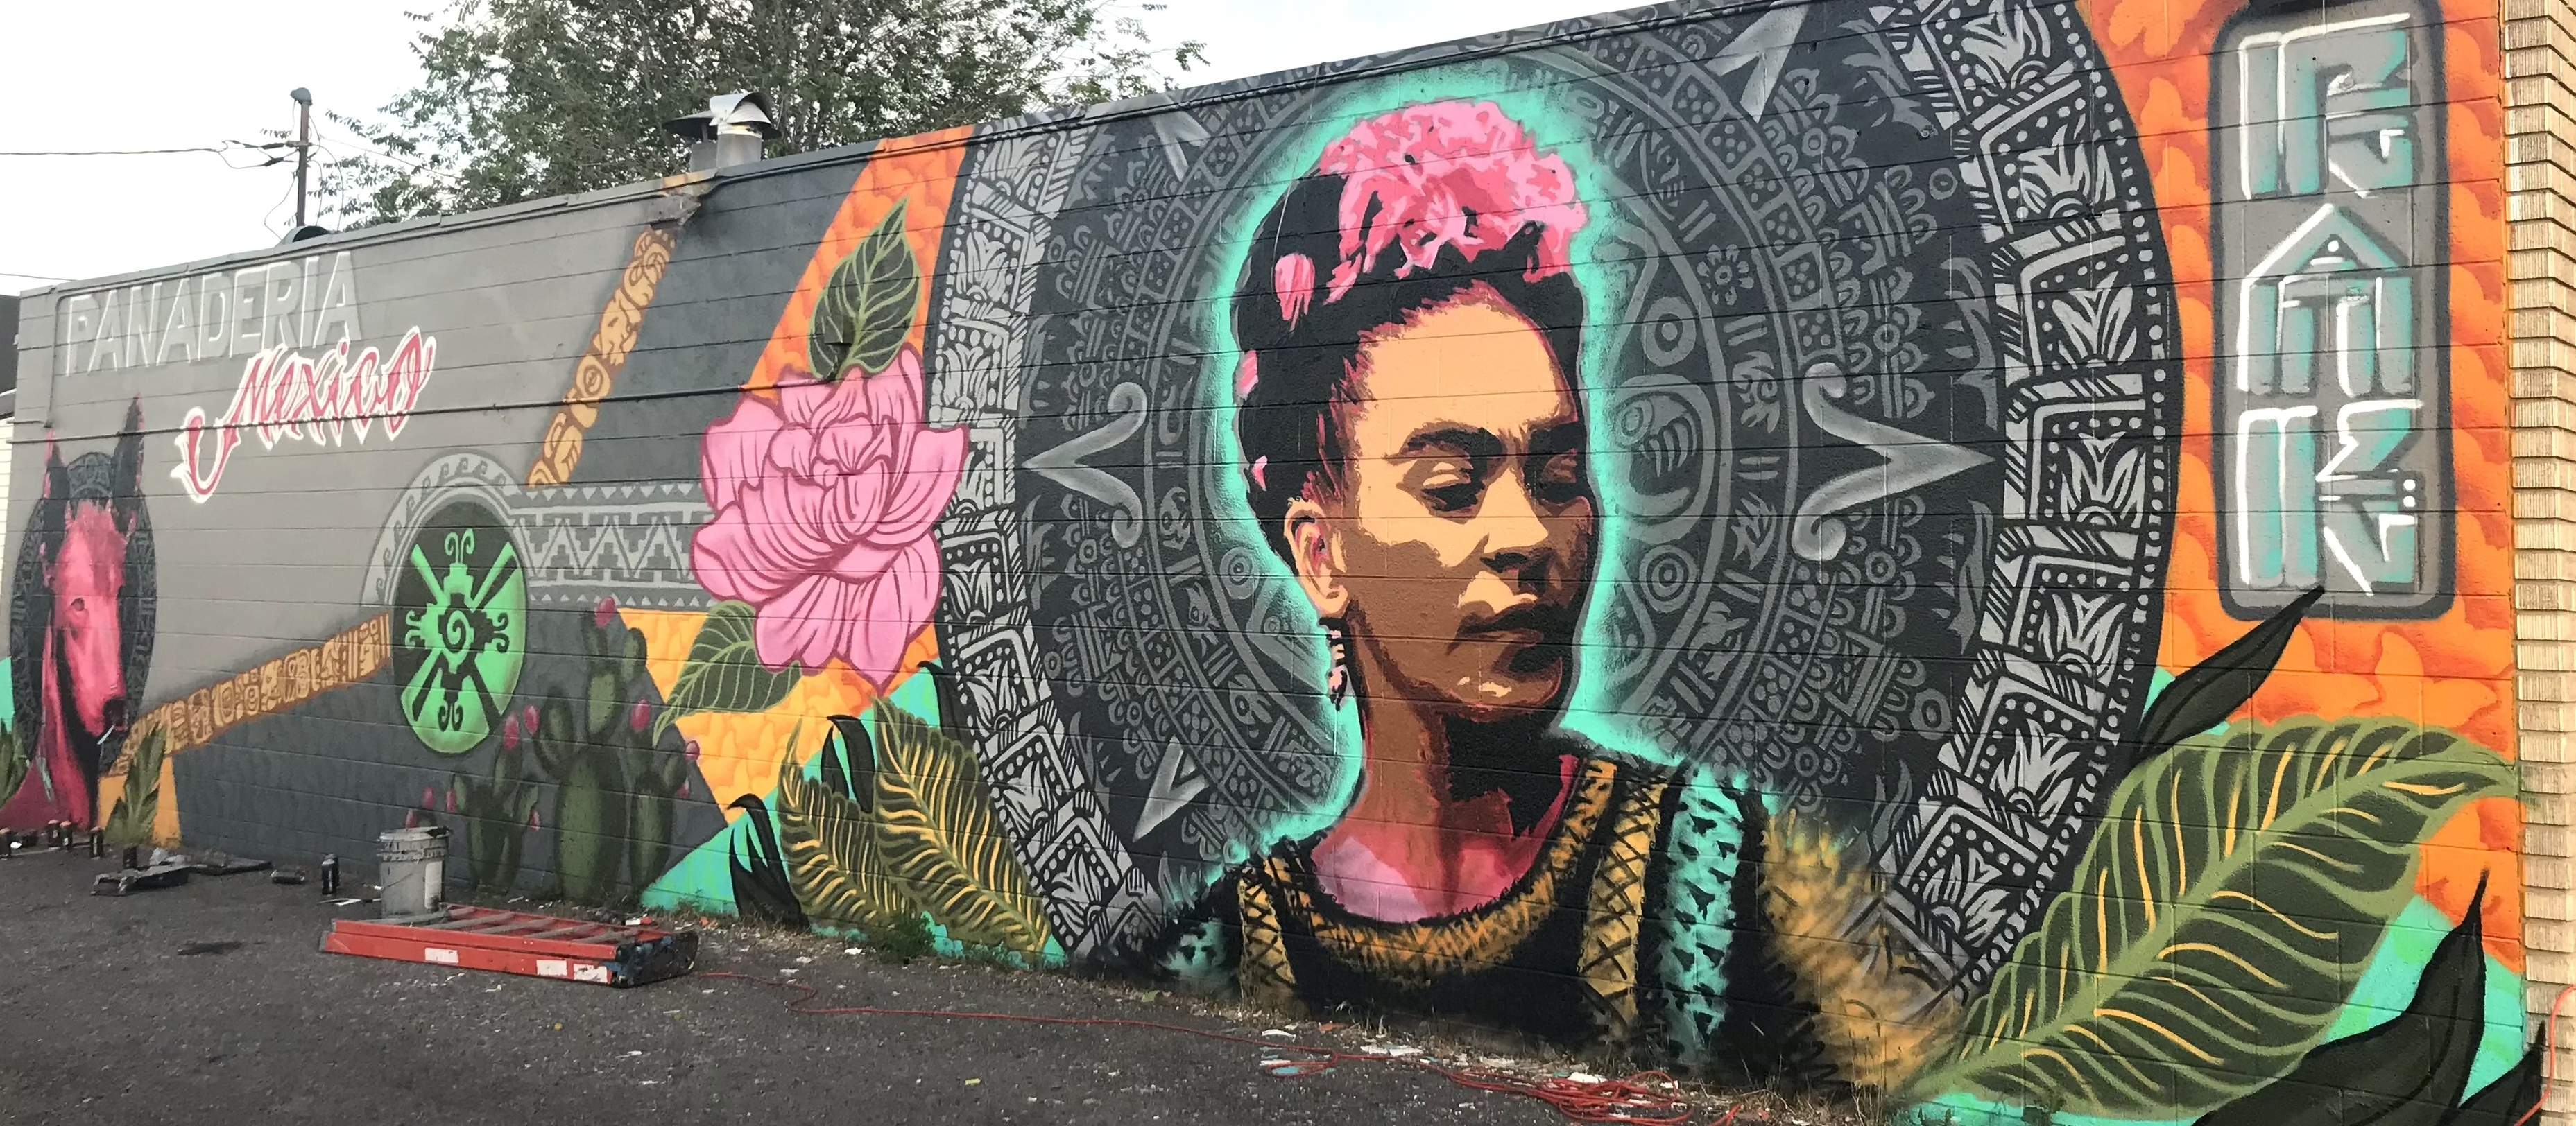 A mural of Frida Kahlo enciricle by an Aztec-looking mandala with the words Panaderia Mexico on the left side of the mural on a cinderblock wall 